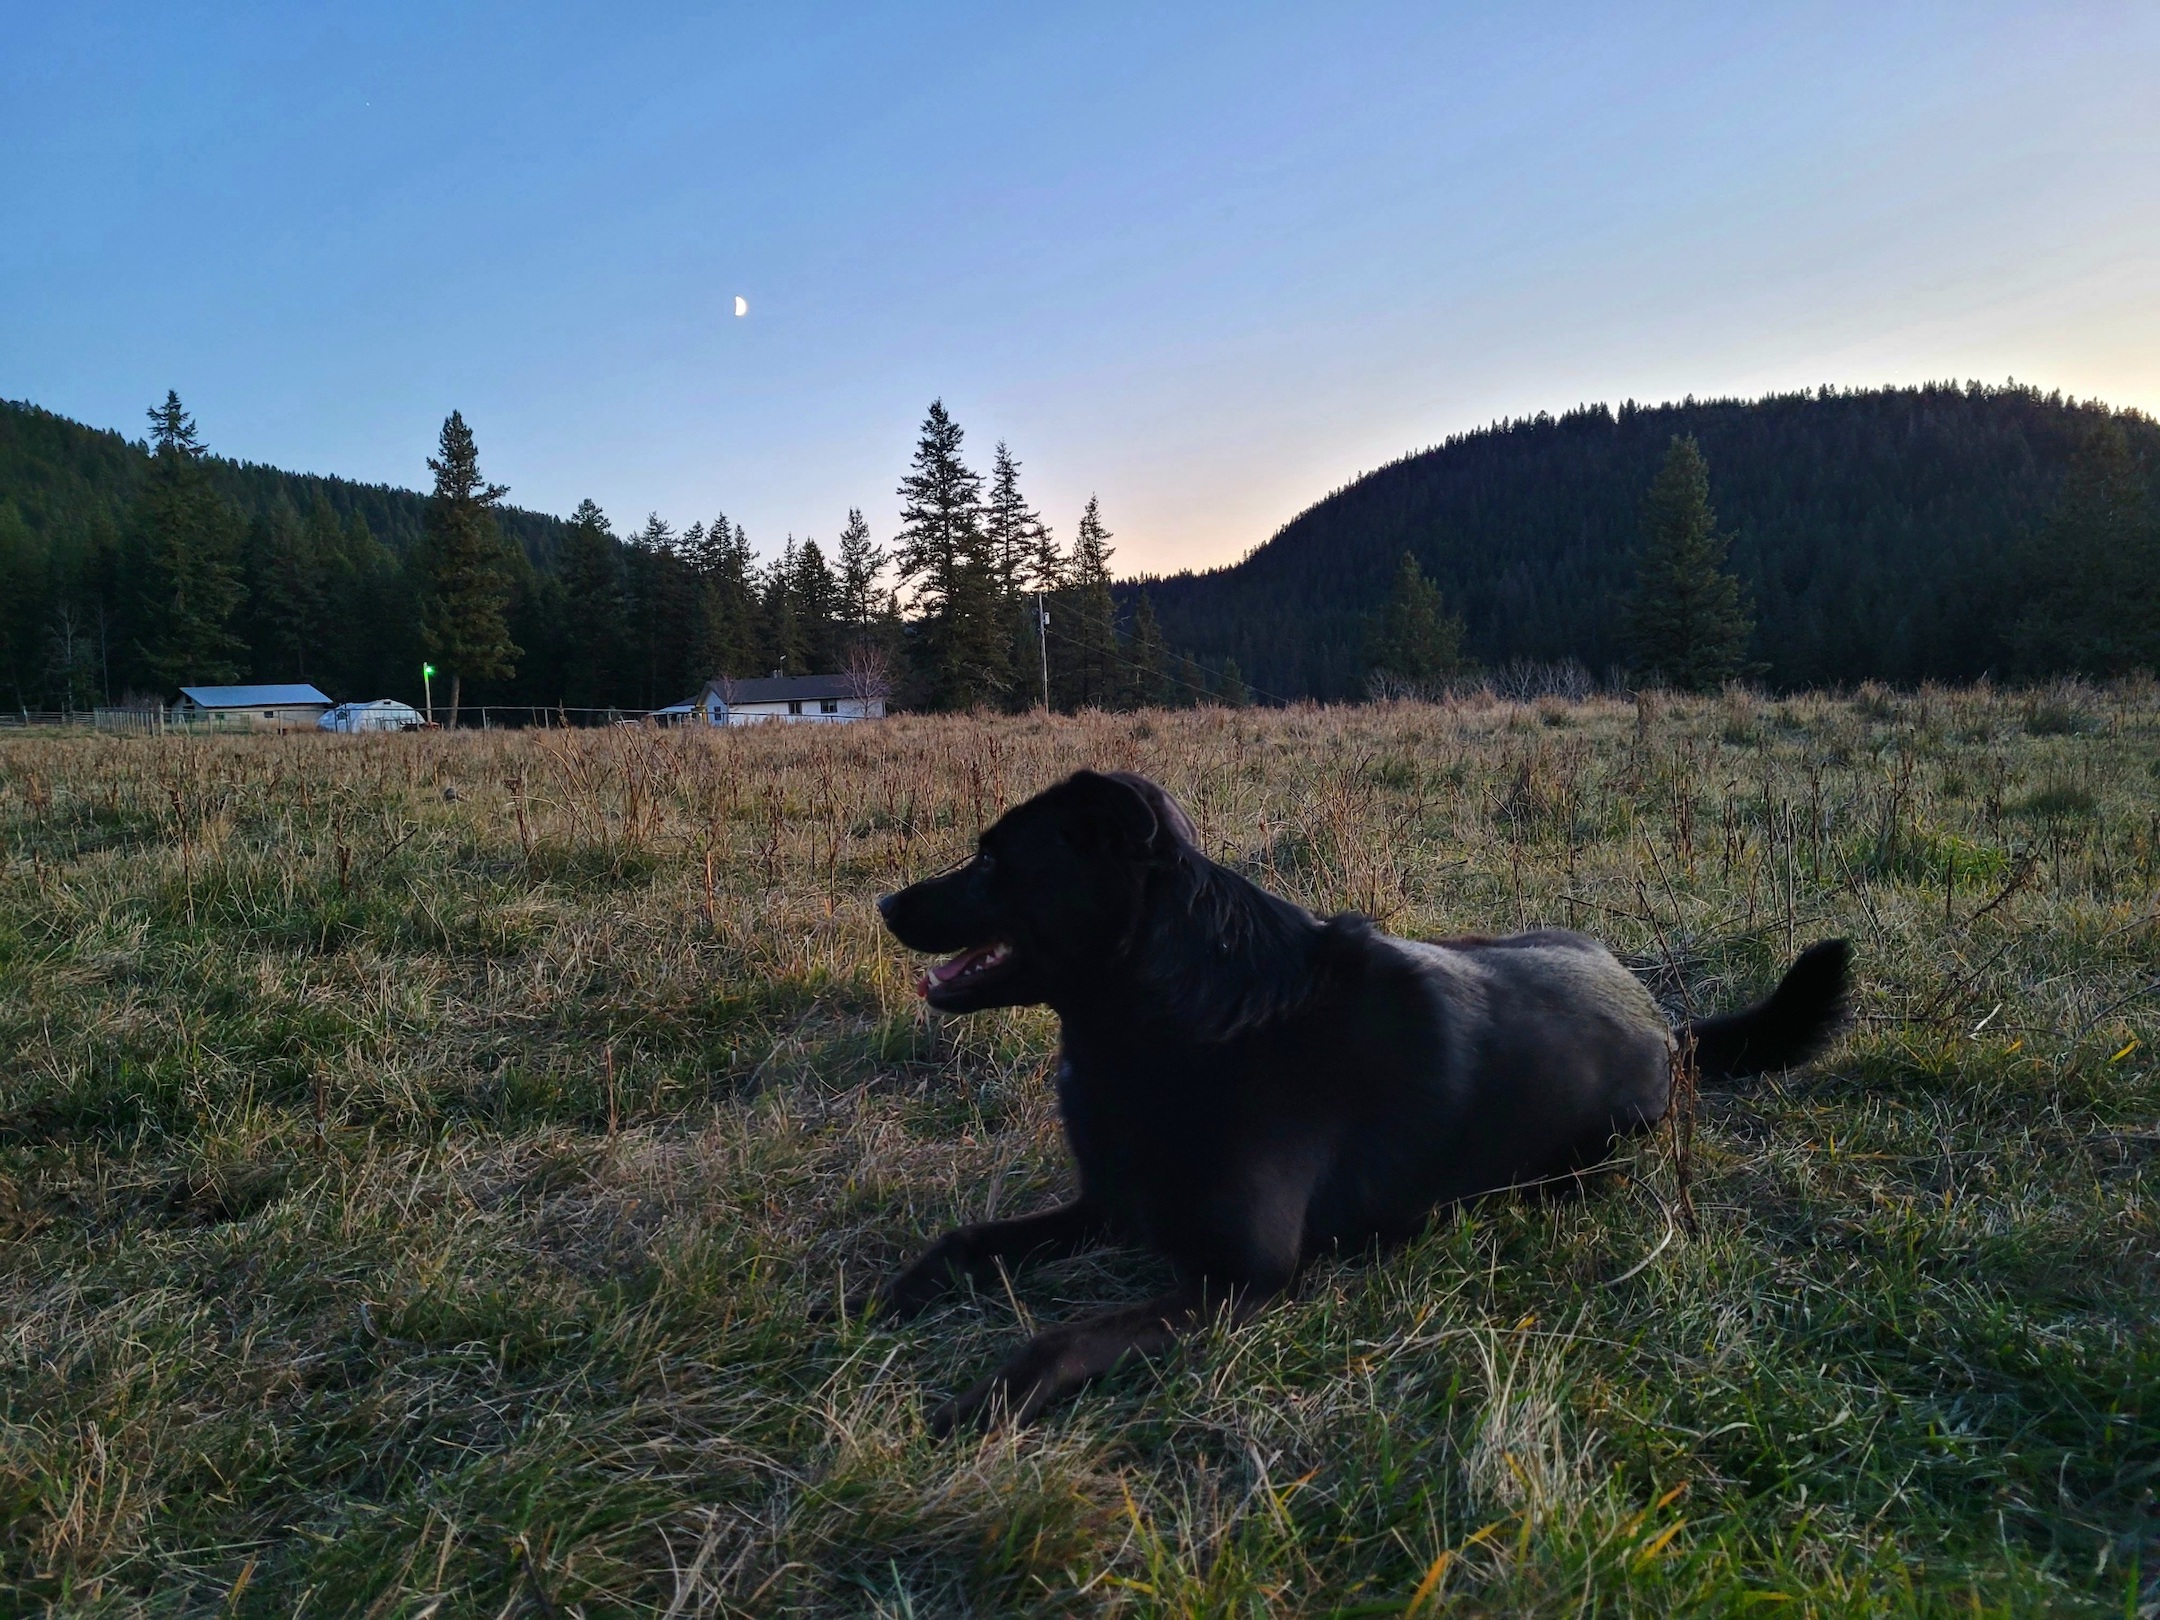 photo of a black dog lying in a field, with a ranch house in the distance, at twilight